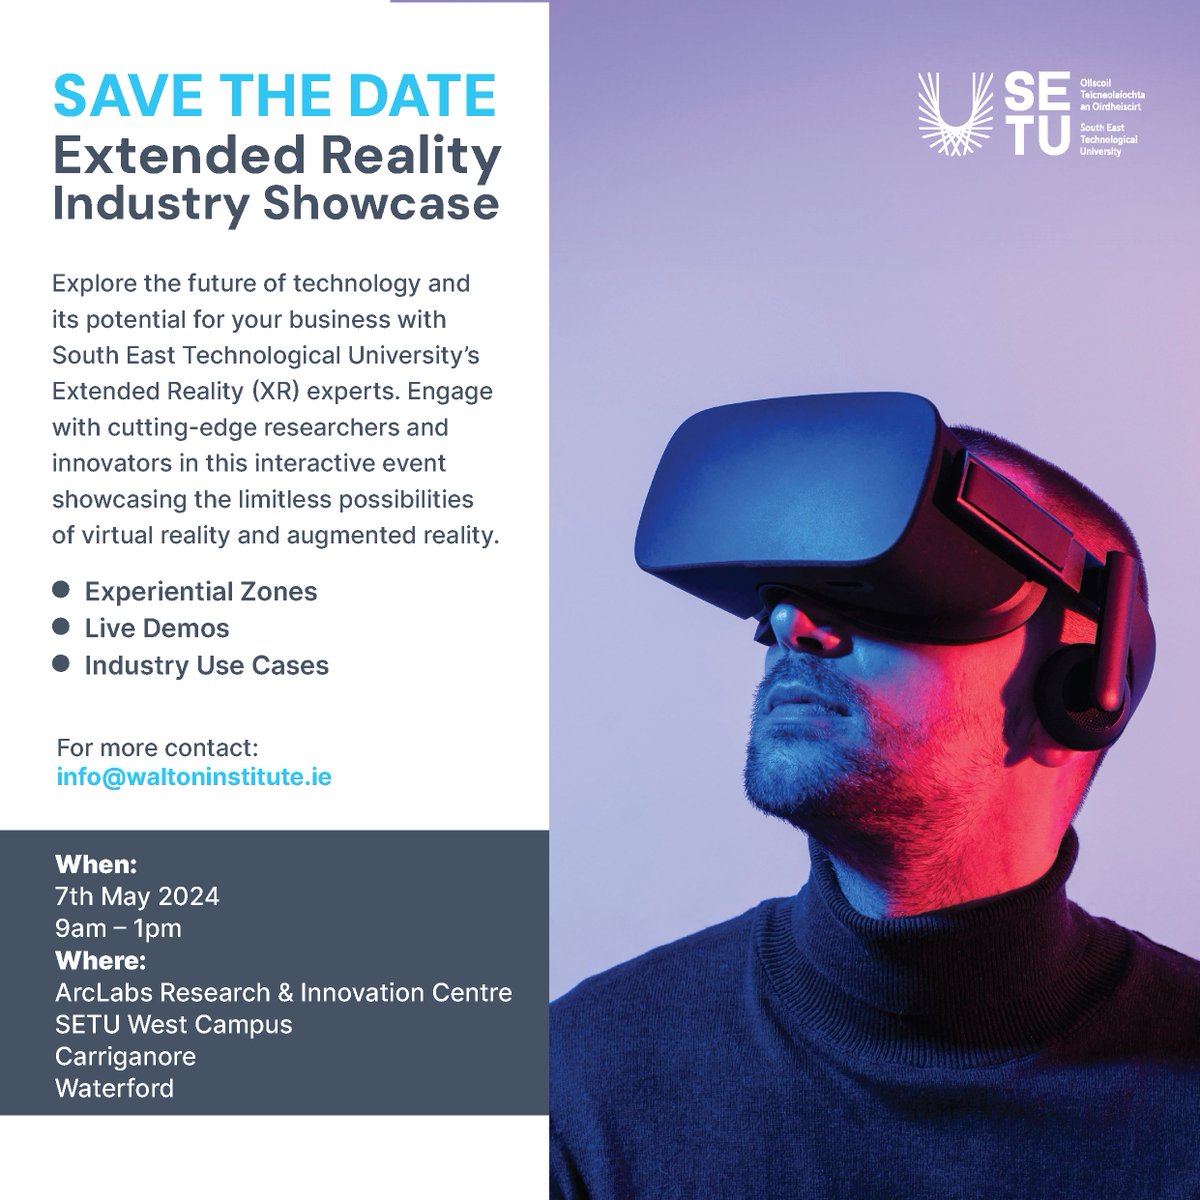 🗓 SAVE THE DATE - REGISTRATION OPENS SOON❗️ We're thrilled to announce @WaltonInst's participation in a new @SETUIreland Extended Reality (XR) event for industry, taking place May 7th at 9am - 1pm in @ArclabsSETU. Join us to explore the potential of this exciting technology. #XR